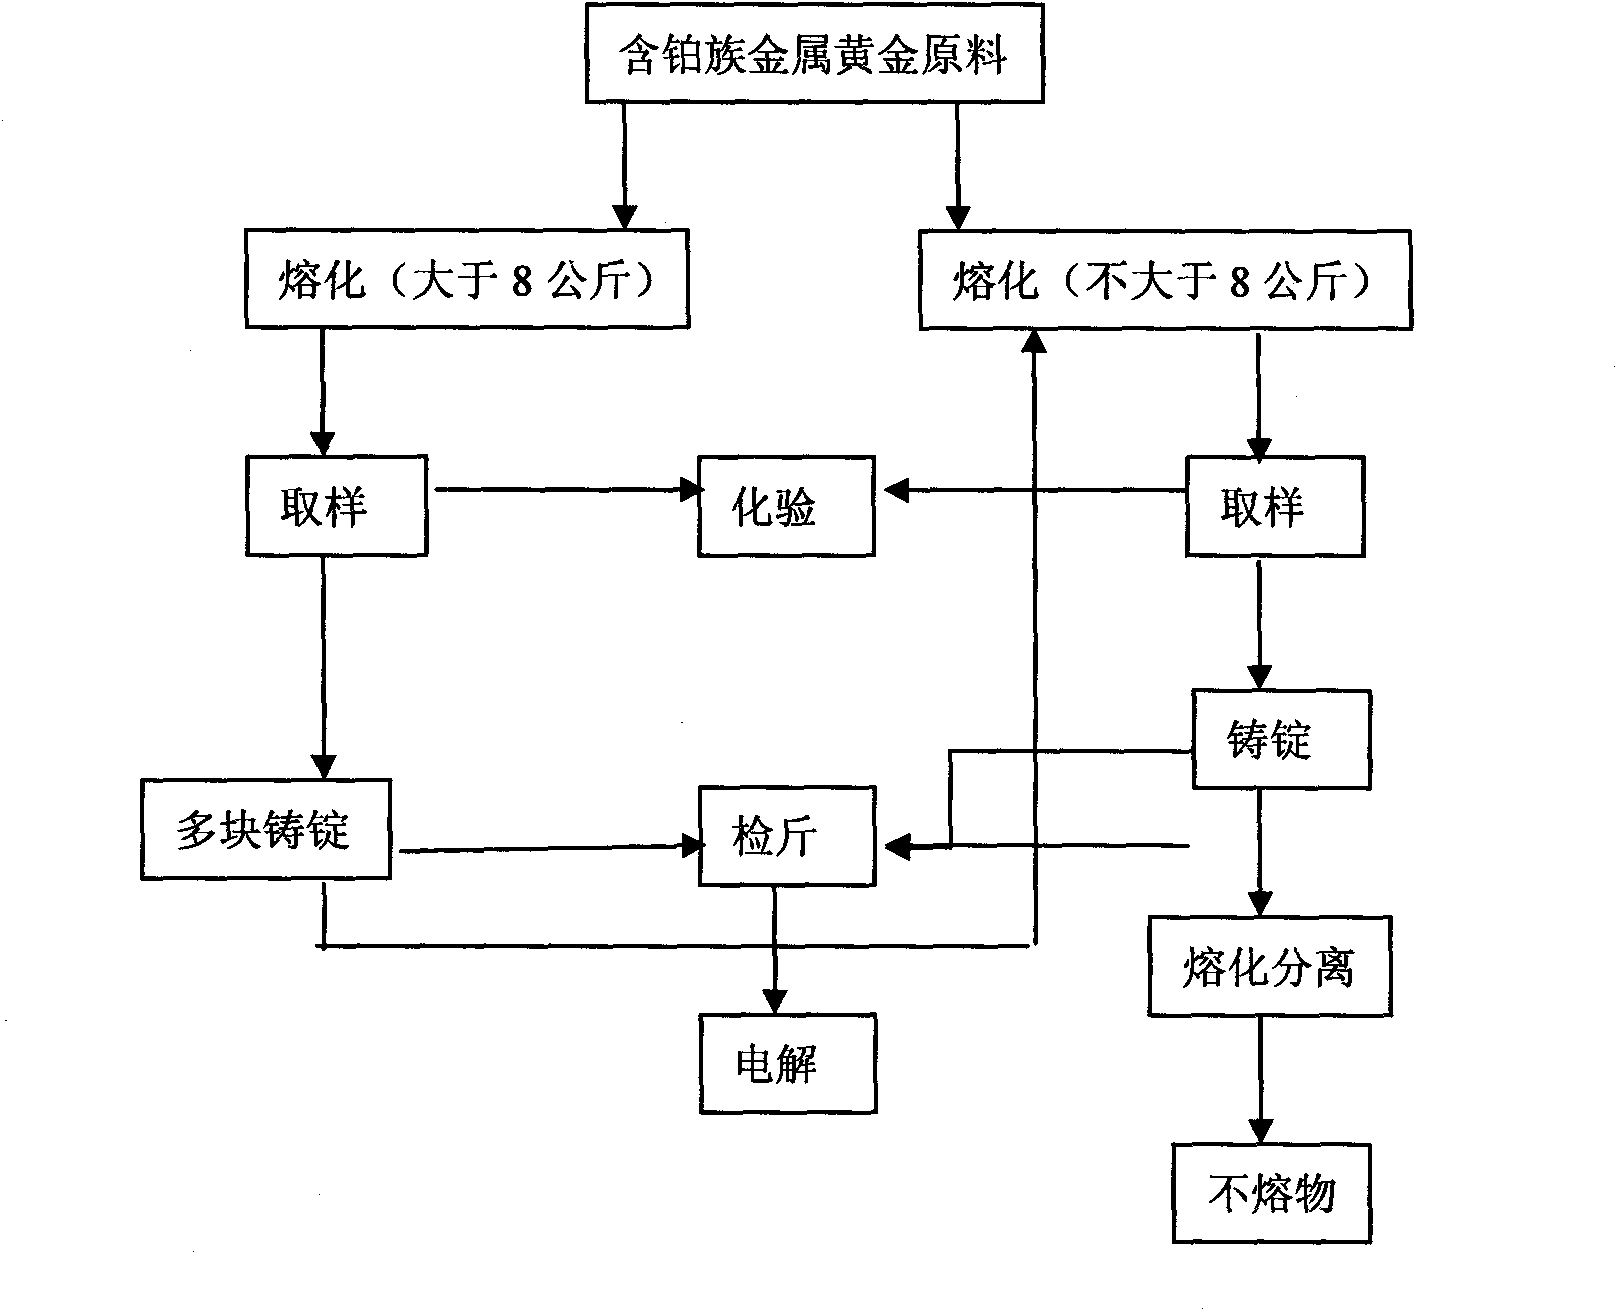 Test method of alloy gold containing gold and silver and platinum group metal